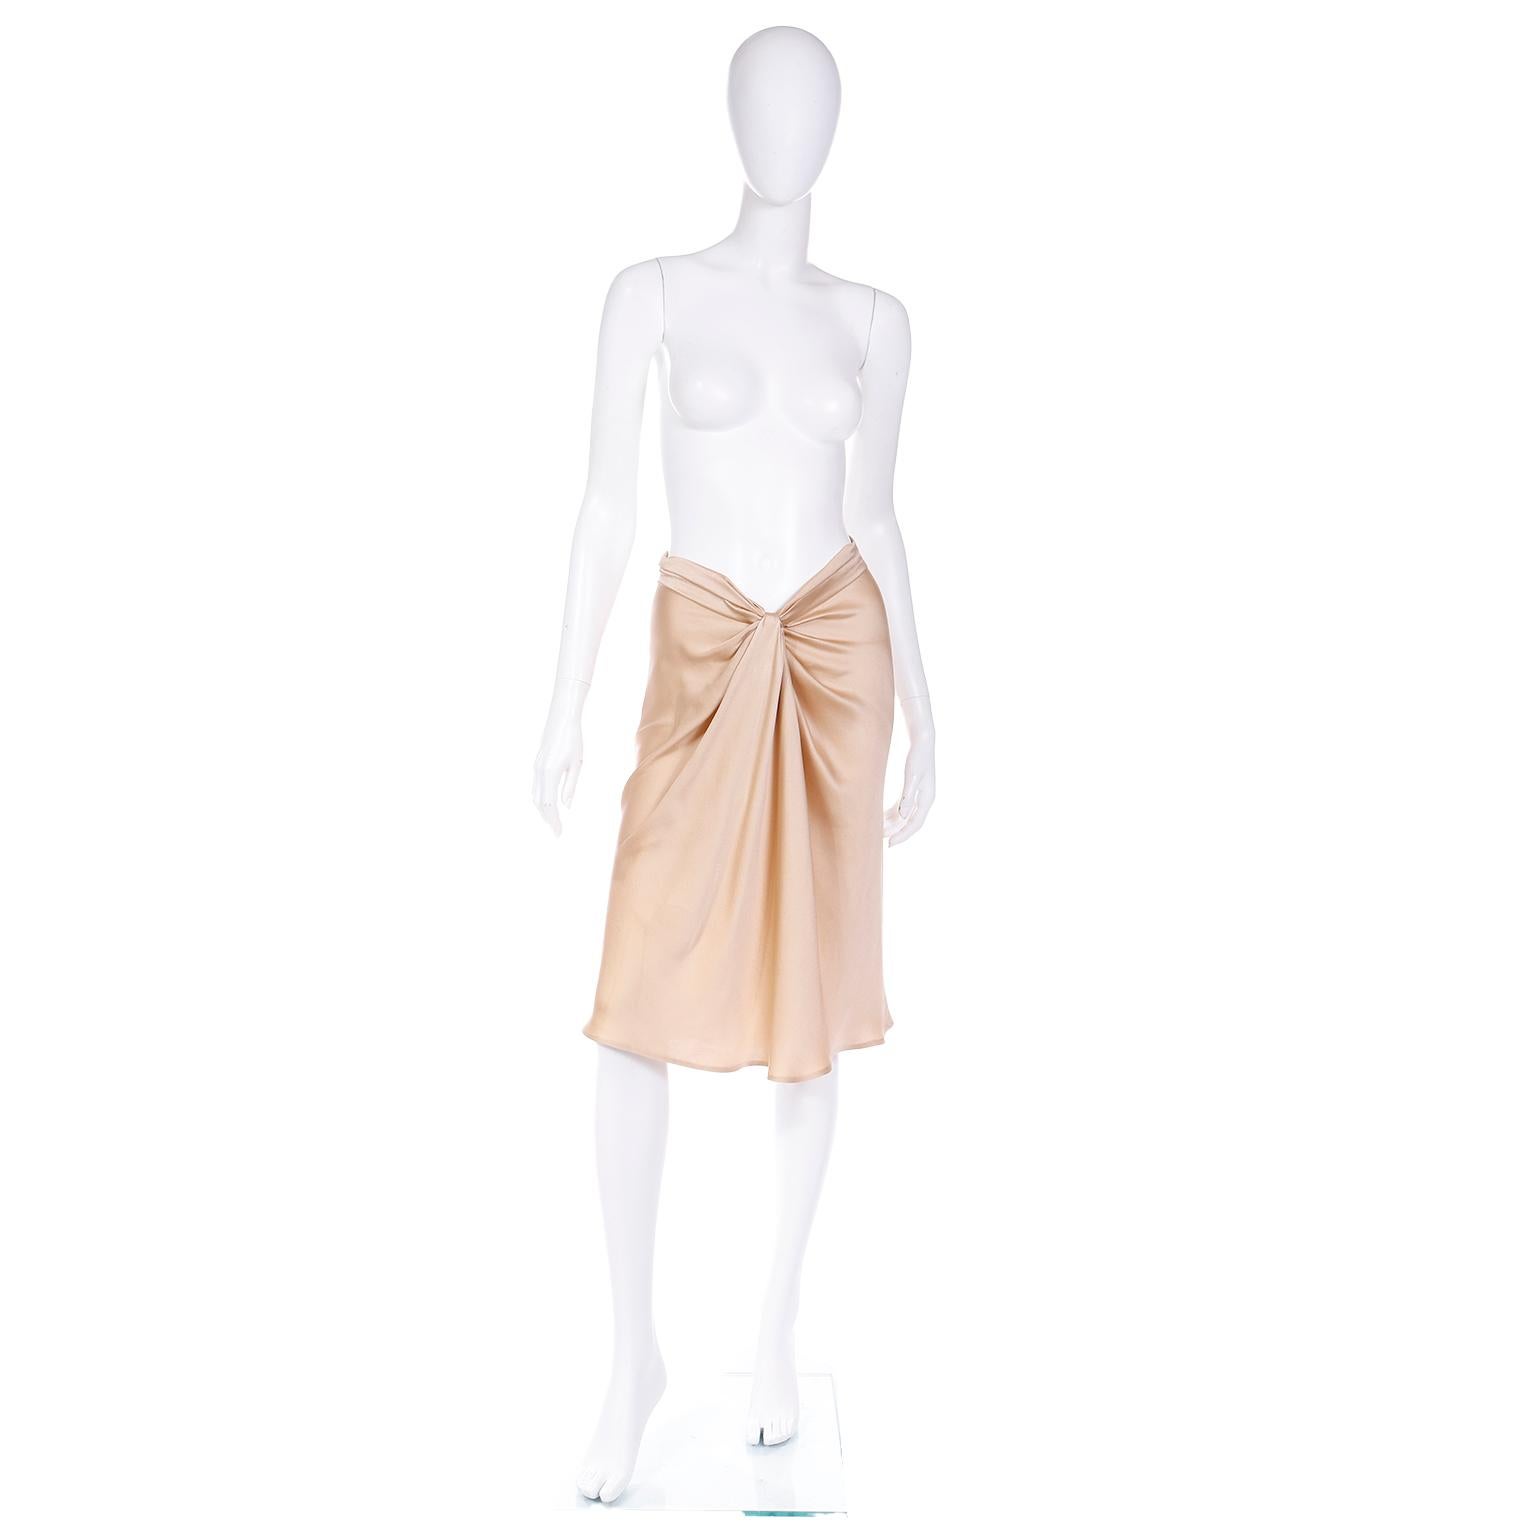 This is an Alberta Ferretti quintessential early 2000's  soft gold luxe silk charmeuse skirt with a uniquely gathered v shape high low waist. This incredible skirt has so many unique details including the interesting tucks in the back. The skirt